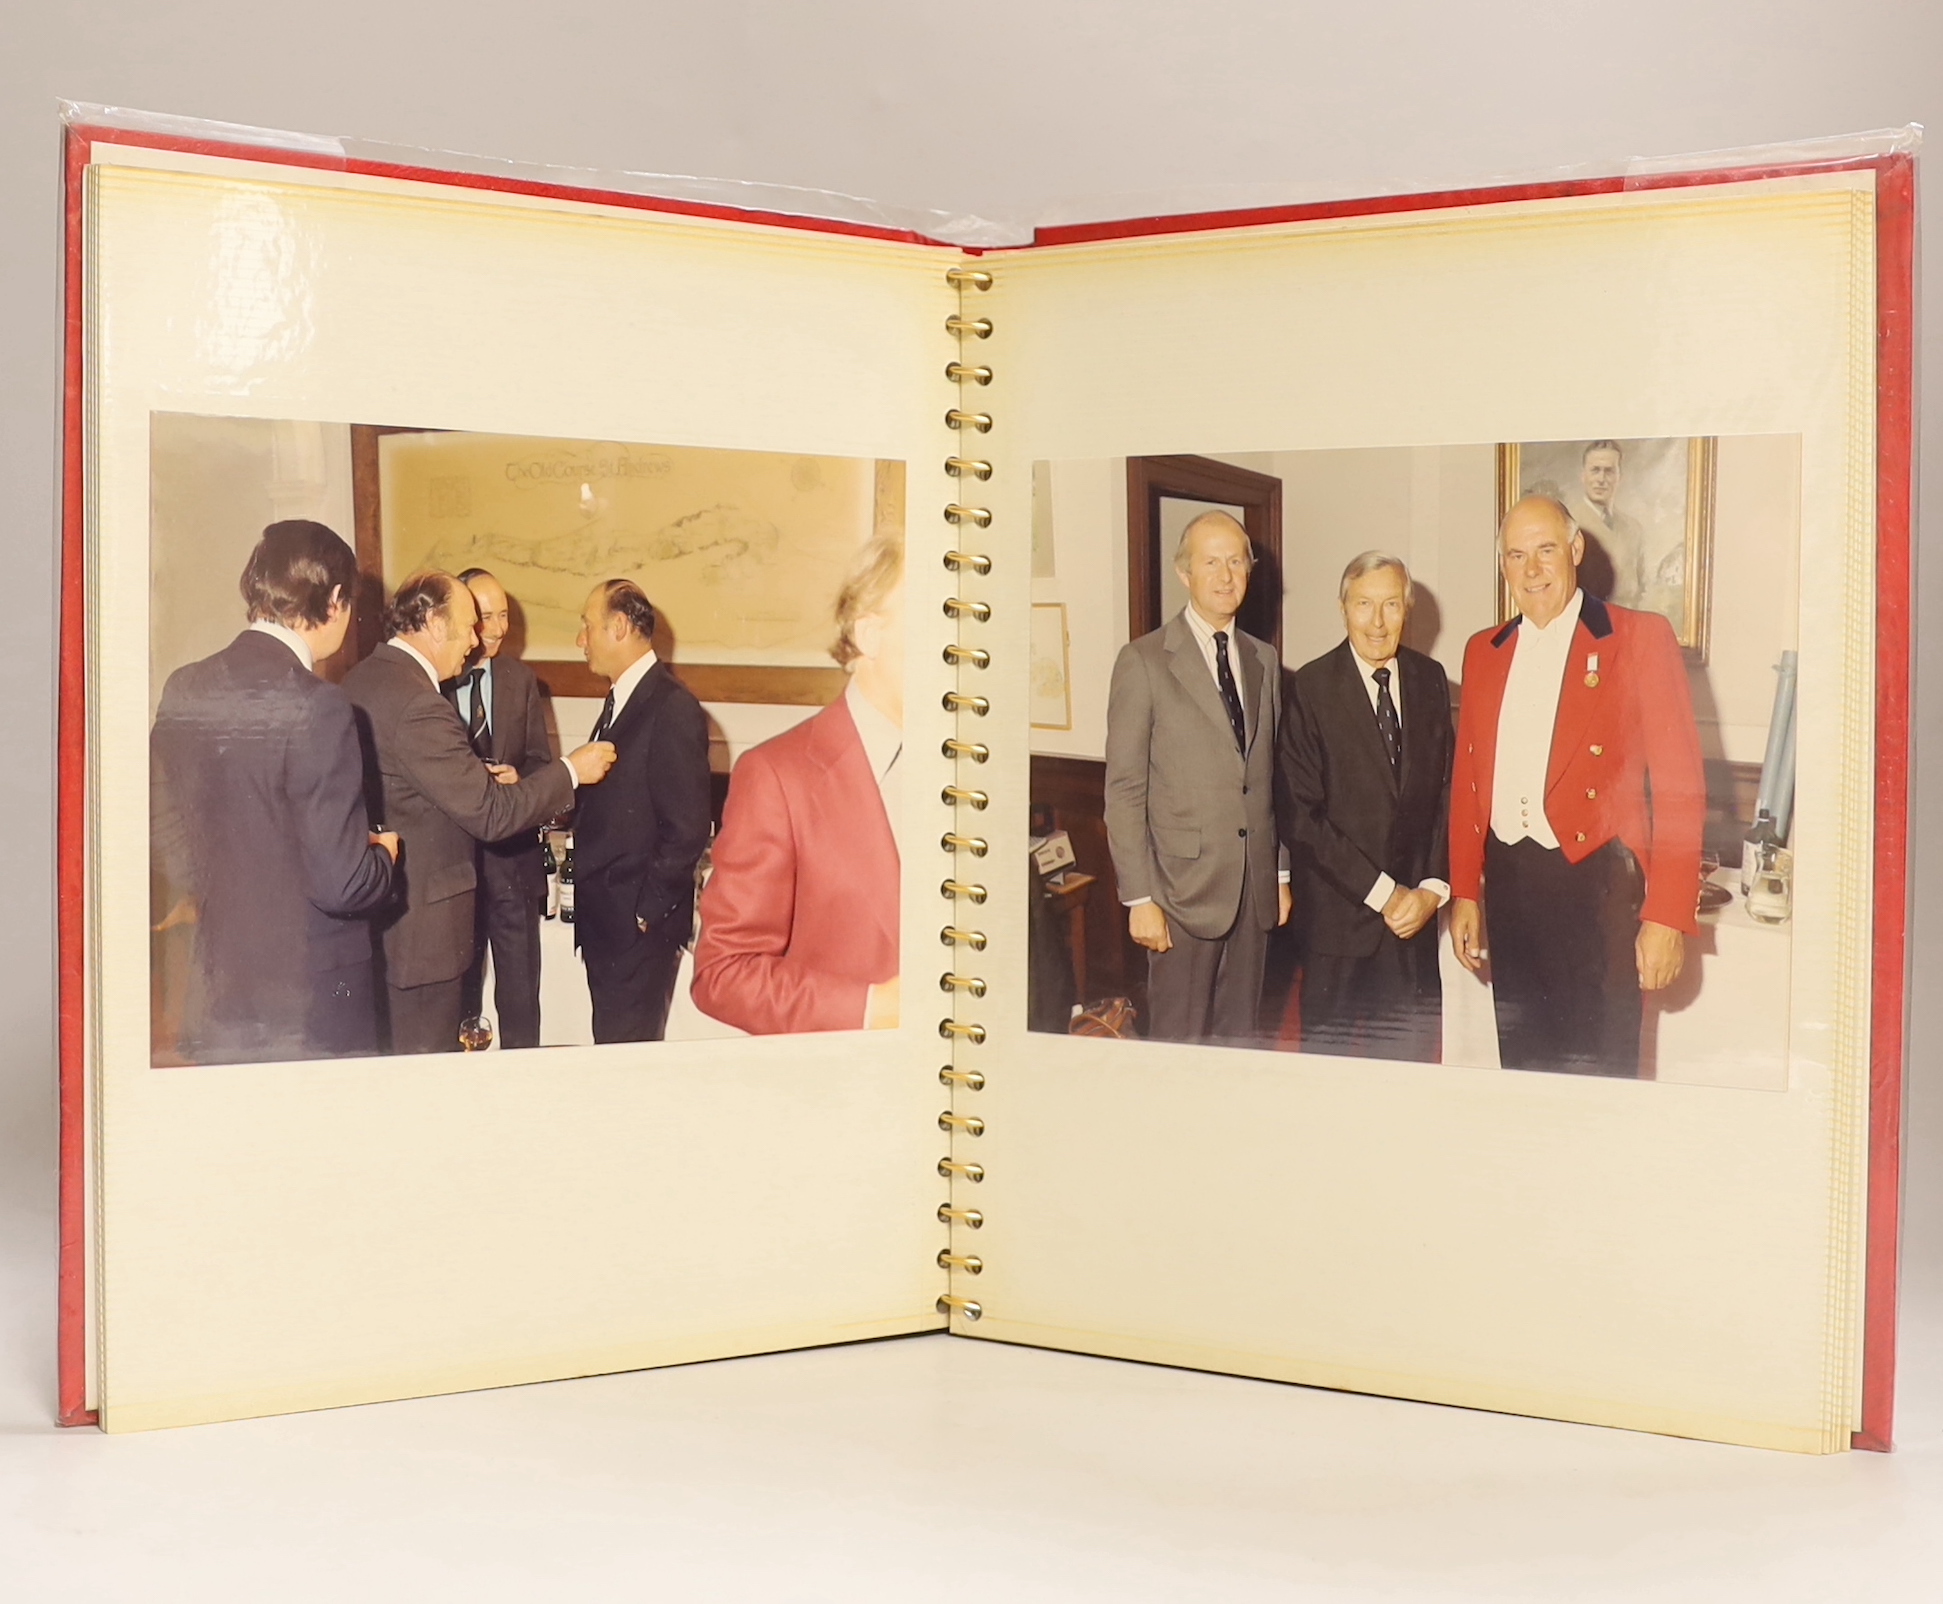 Golf Interest. An album containing photographs, menu and autographs of British Open Winners, gathered the 1978 Dinner for Winners of the Open Championship, and various books on the British Open